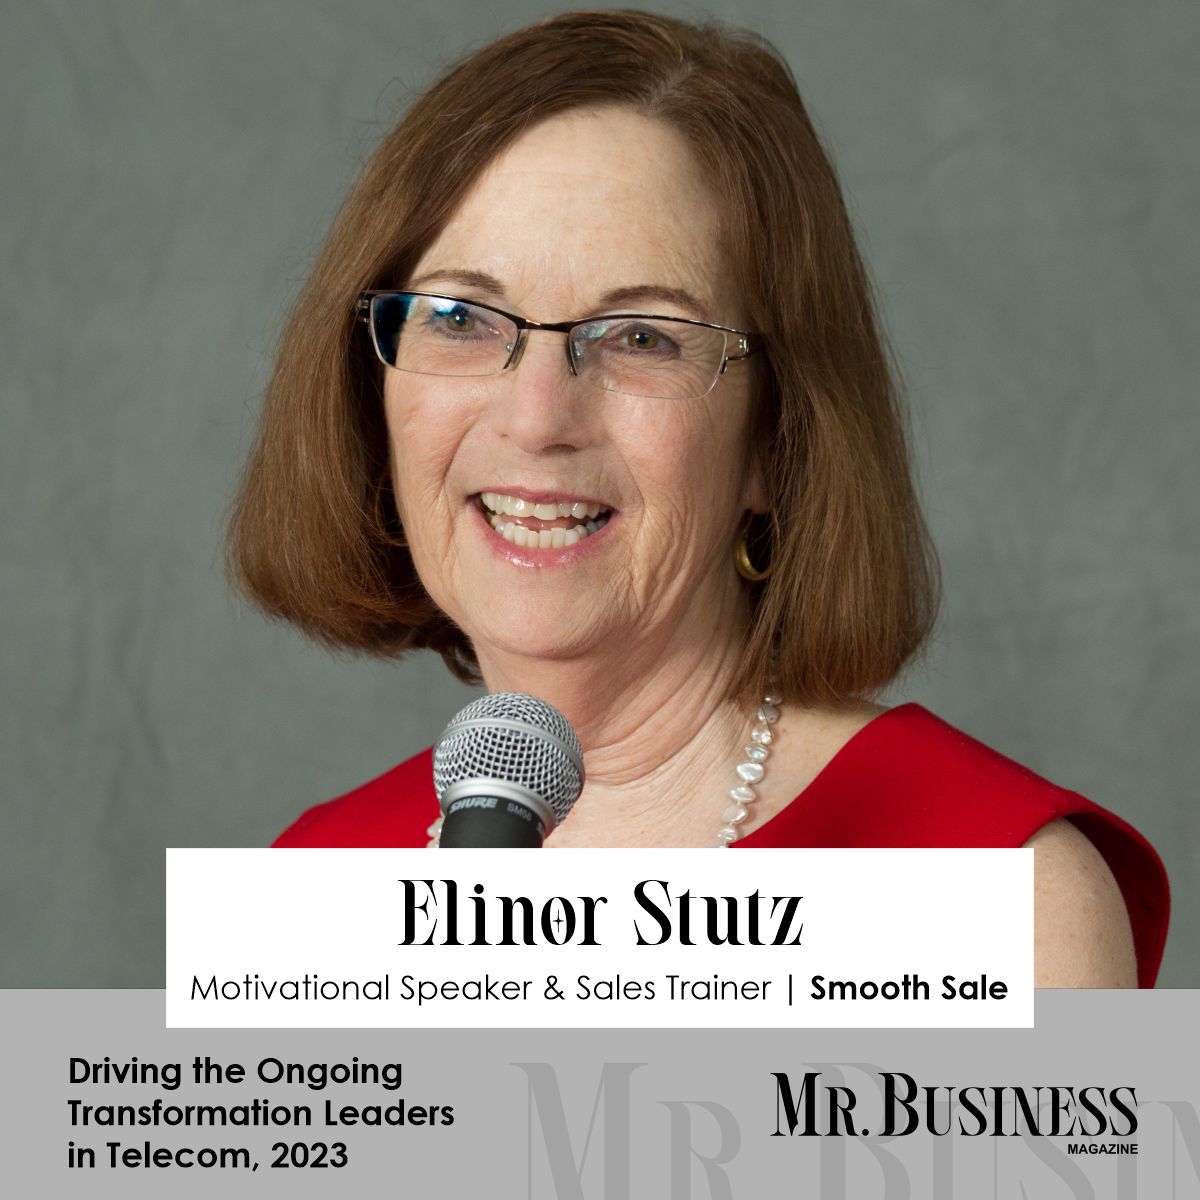 Elinor Stutz- A Networking And Sales Powerhouse! | Mr. Business Magazine